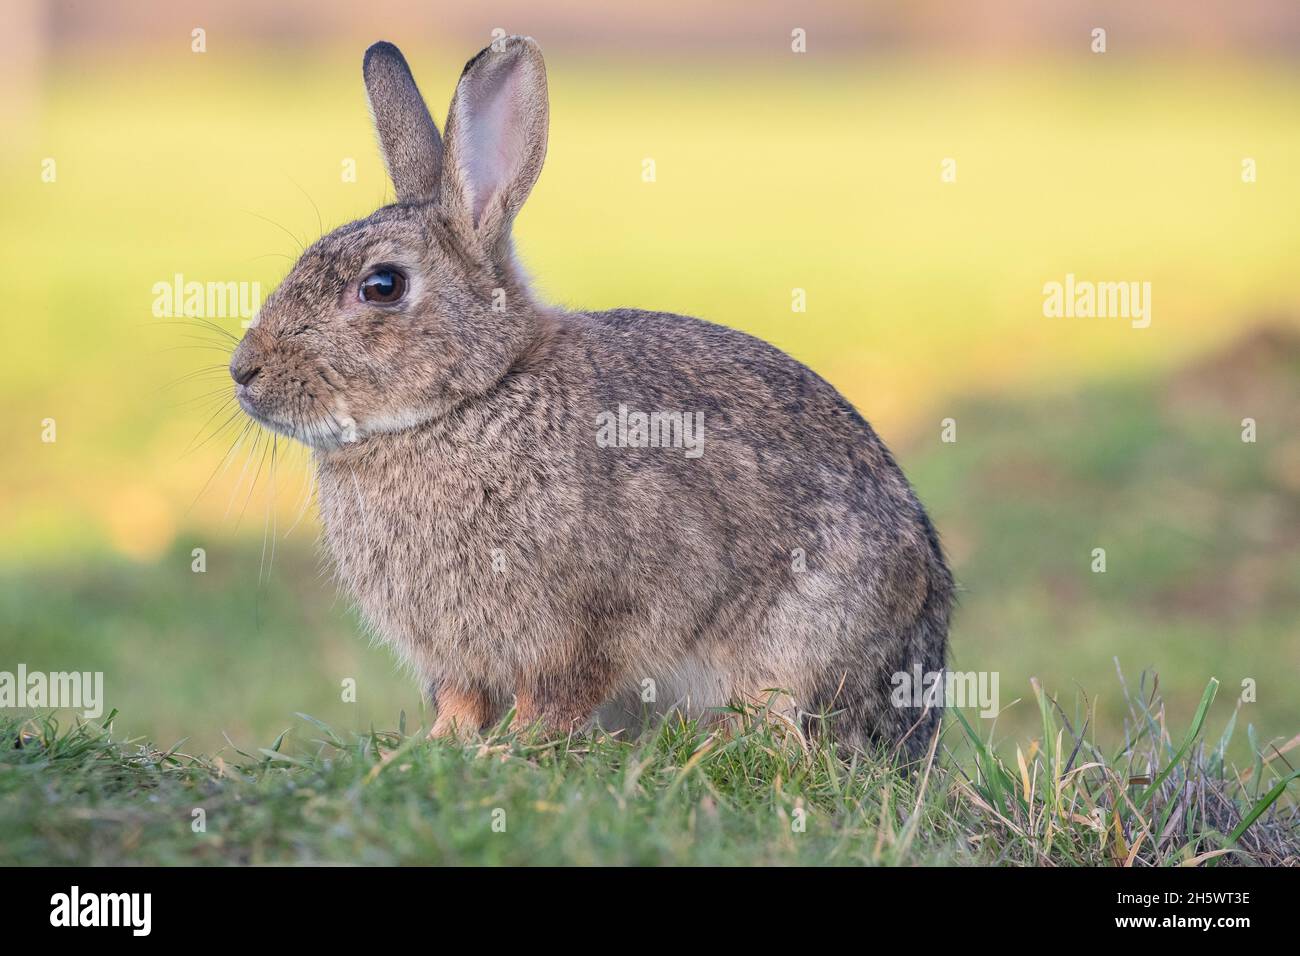 A  close up of a young Rabbit sitting on a natural but bright coloured background. Suffolk, UK Stock Photo